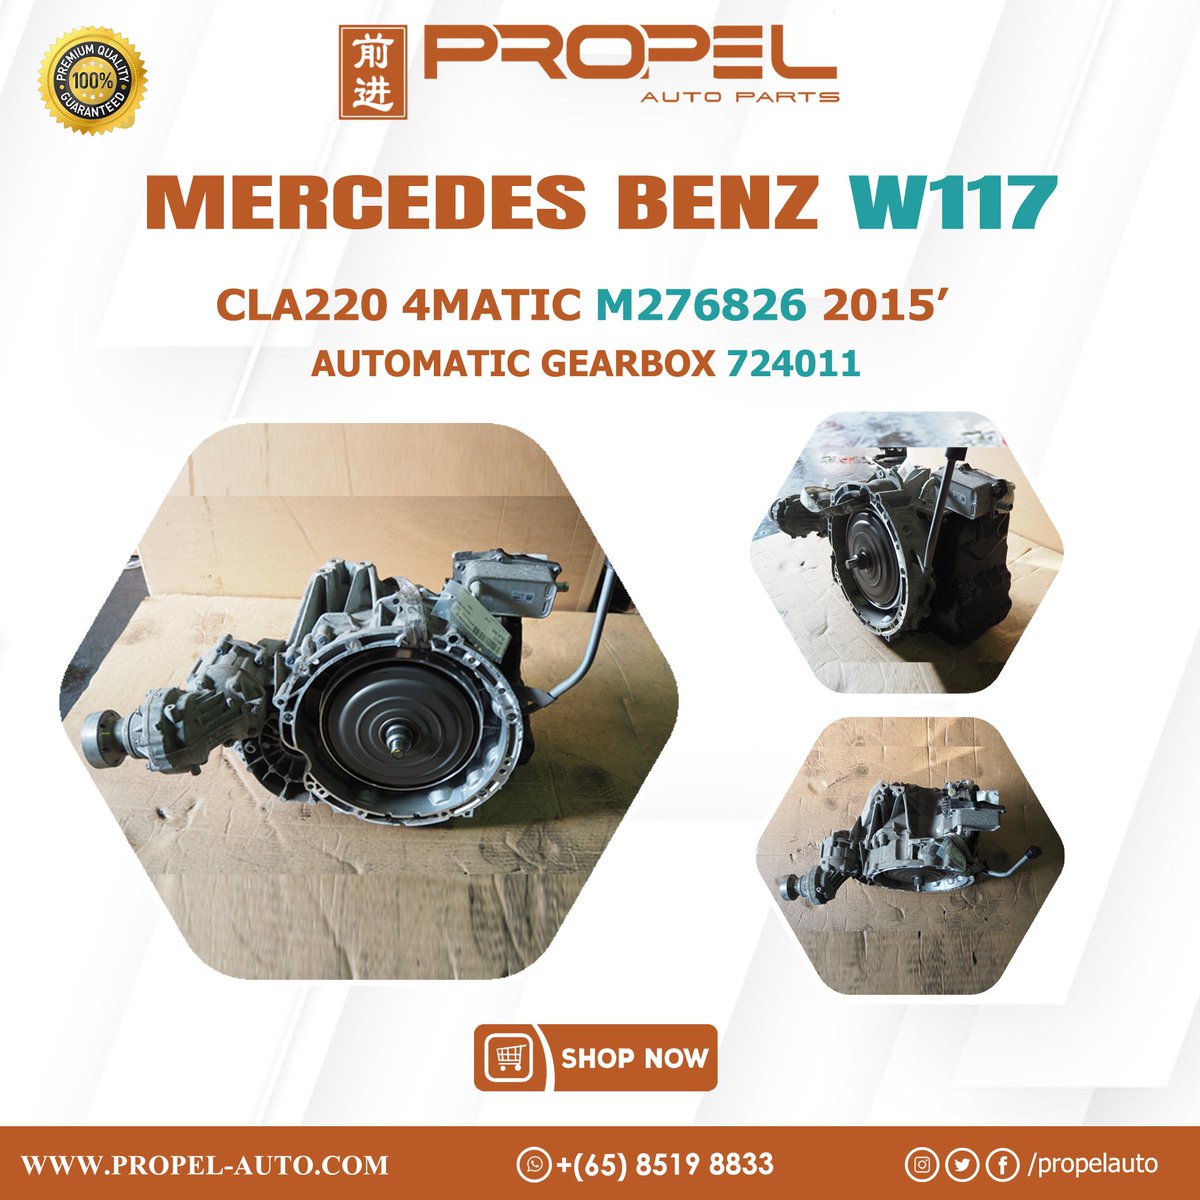 Mercedes W117 CLA 724011 Automatic Transmission Gearbox available #ForSale Ping us & Replace your Noisy Gearbox🧐🛒 #W117 #CLA180 #CLA220 #CLA200 #Gearbox #Useditem #GenuineParts #LowMileageGearbox #Imported #PremiumQuality #SG #PropelAuto #MercedesBenz #Automatic #Ping #Now